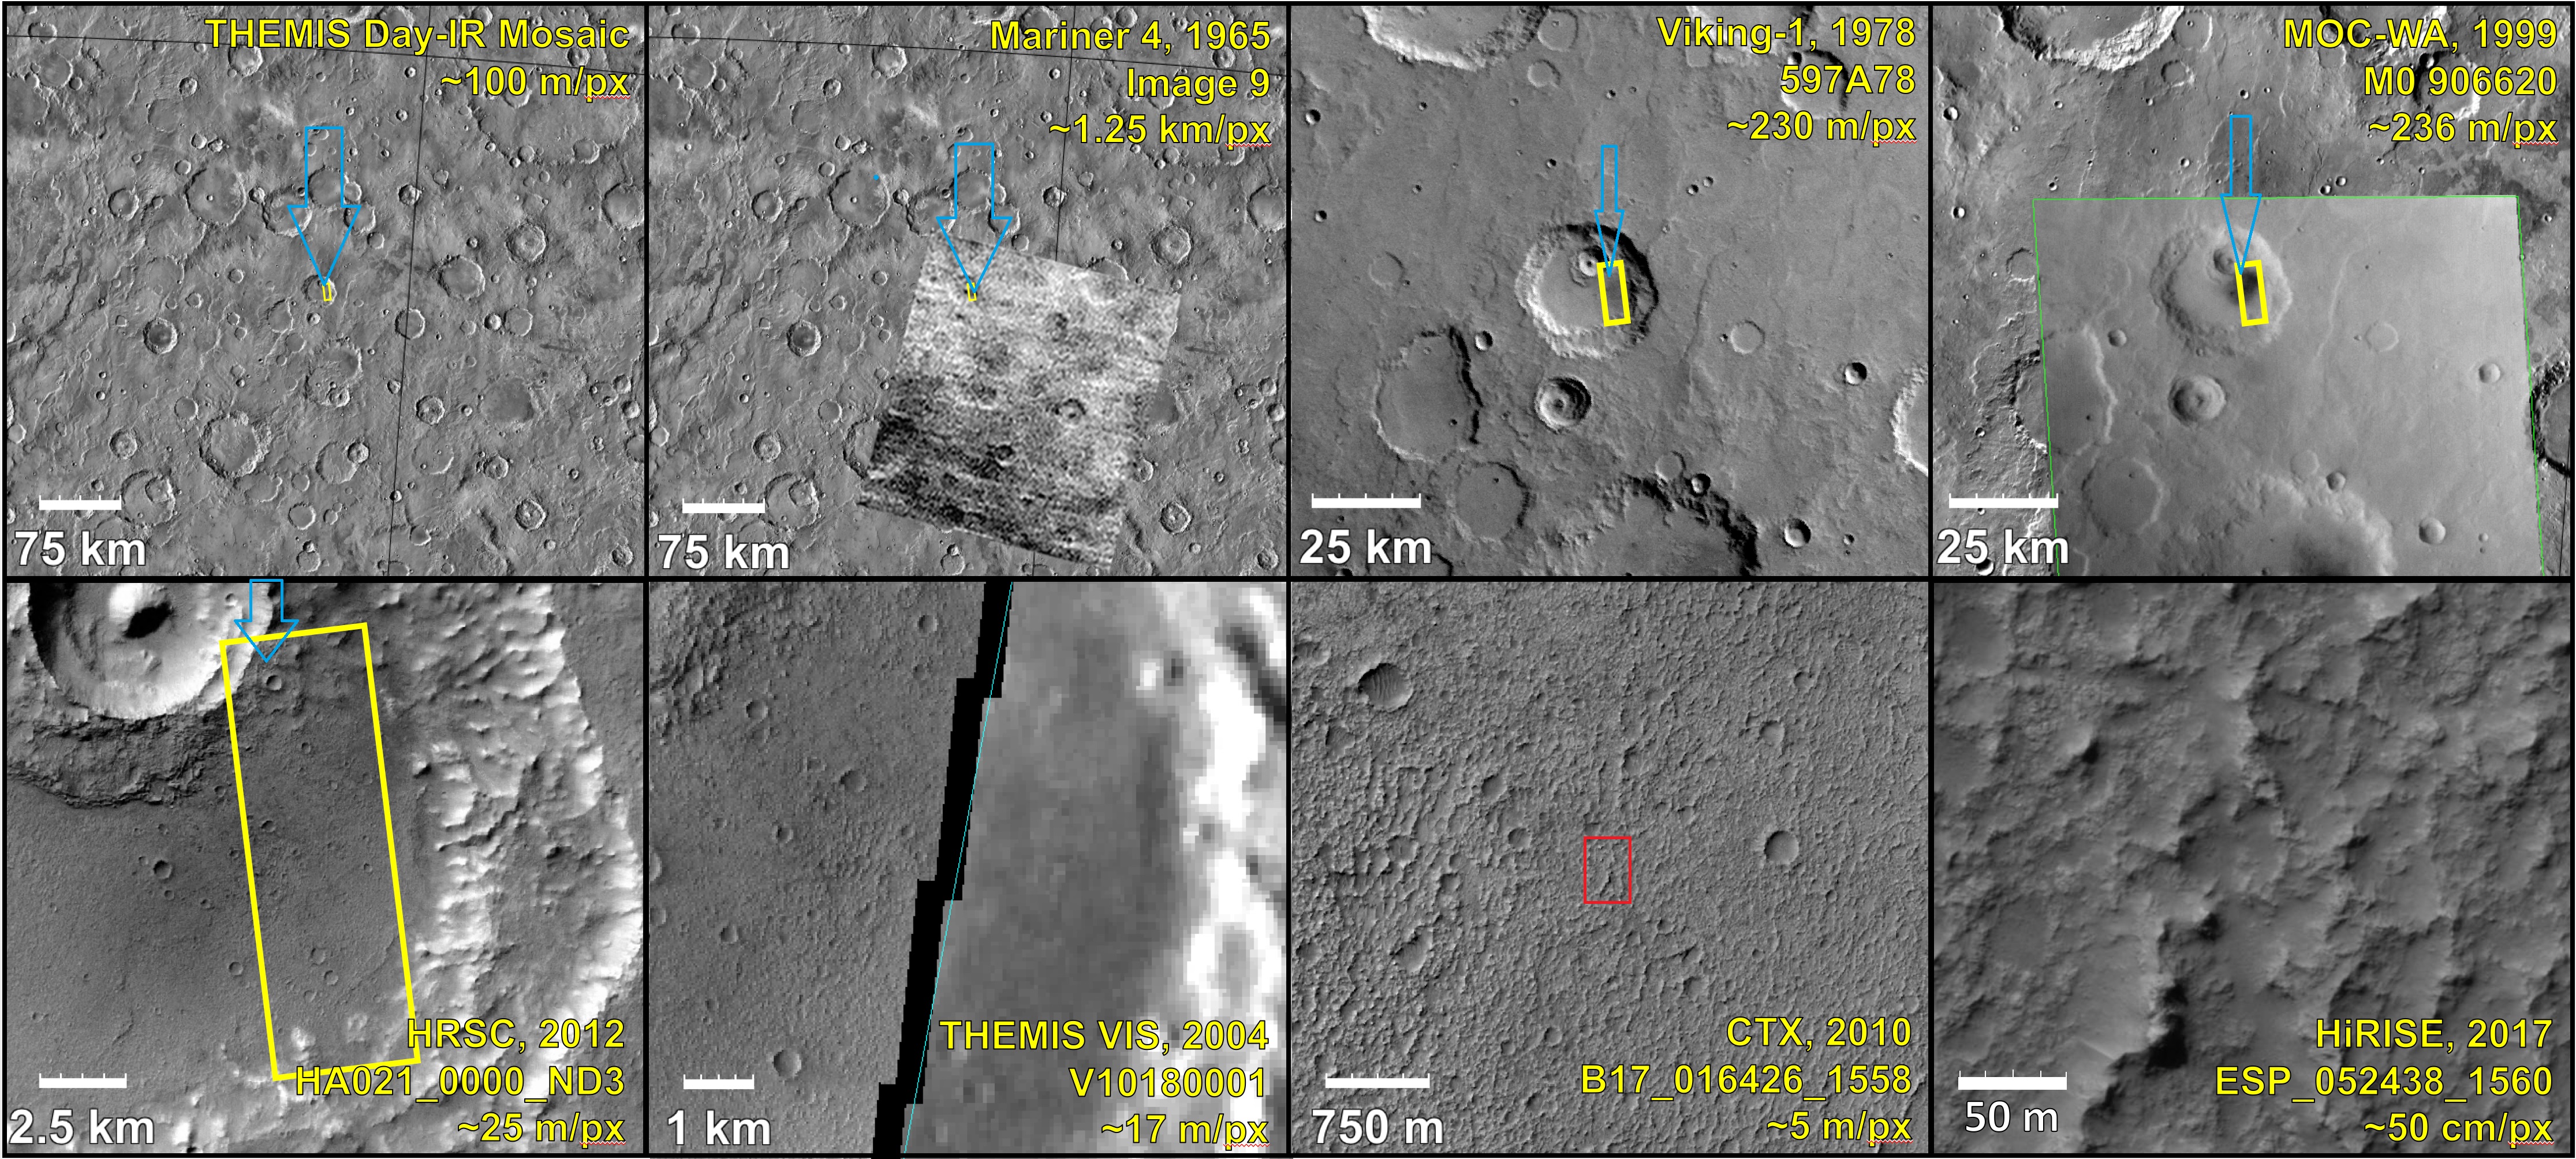 Composite demonstrating relative resolution of 7 different cameras that imaged Mars: HiRISE (Mars Reconnaissance Orbiter), THEMIS VIS (Mars Odyssey), MOC-WAC (Mars Global Surveyor), HRSC (Mars Express), CTX (Mars Reconnaissance Orbiter), Viking, Mariner 4. Location is Memnonia quadrangle. Blue arrow on some pictures points to same location with different cameras. Red box with CTX image shows location of the next frame from HiRISE.